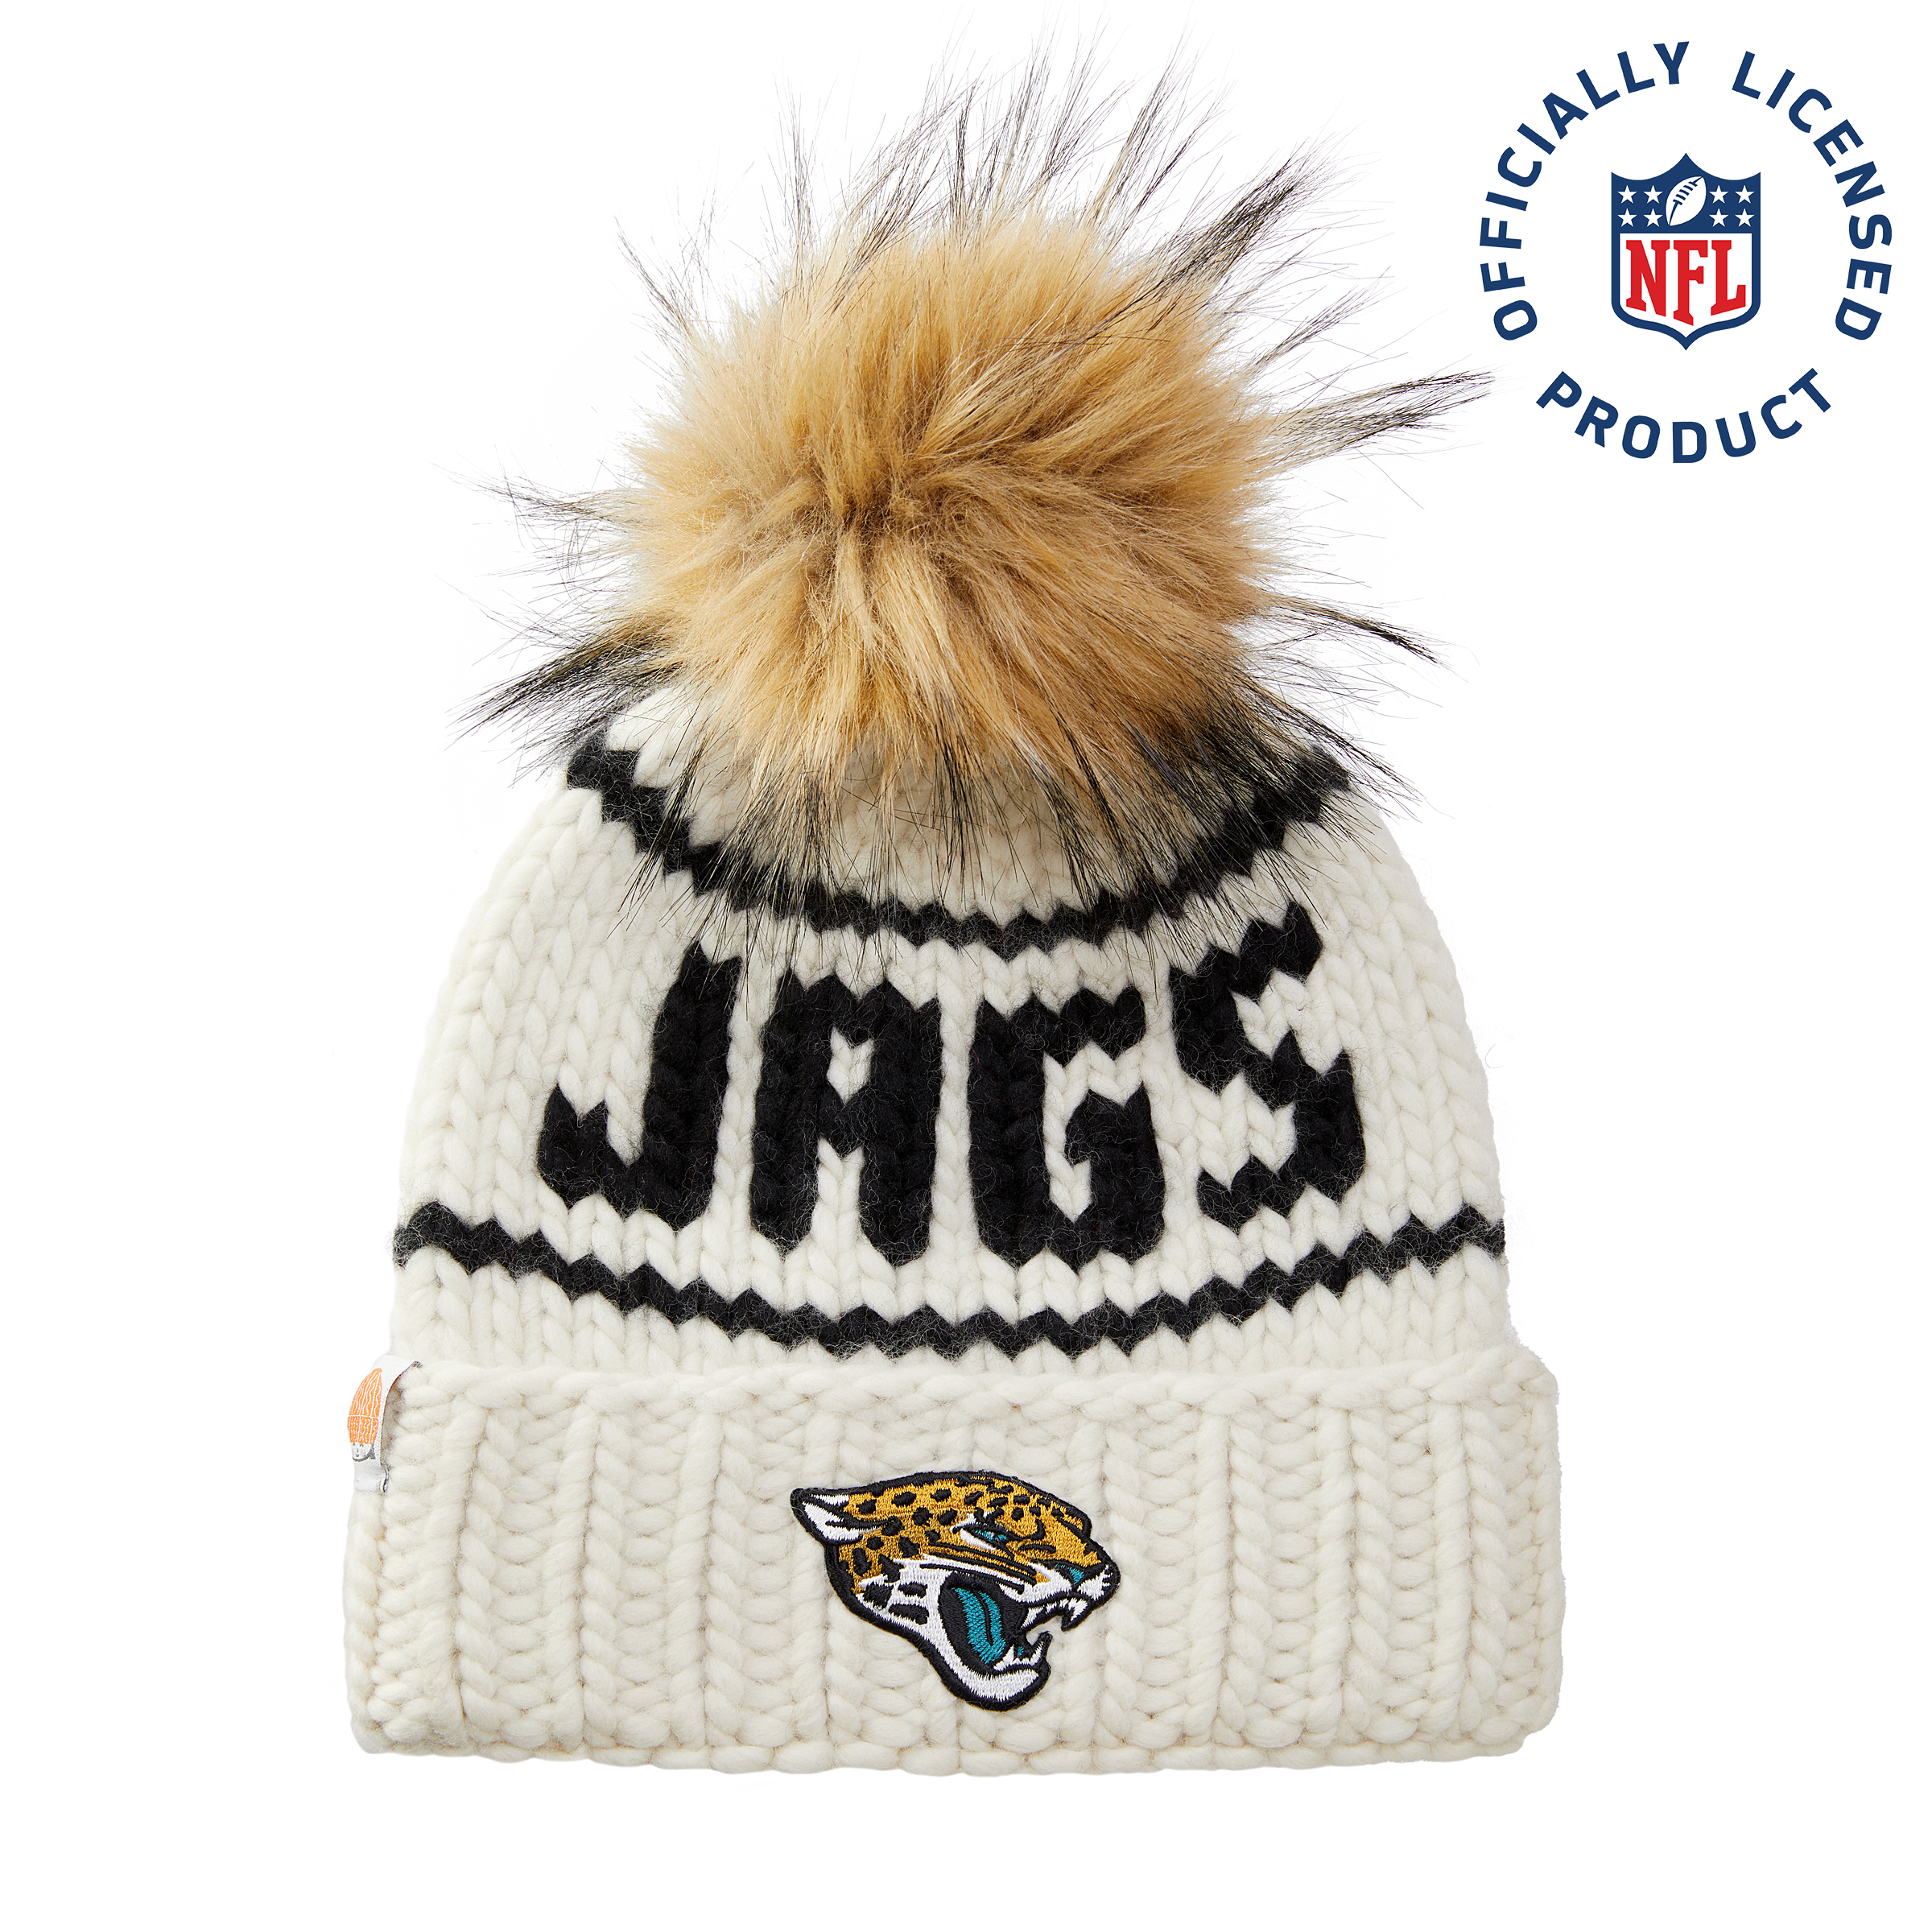 The Jags NFL Beanie with Faux Fur Pom